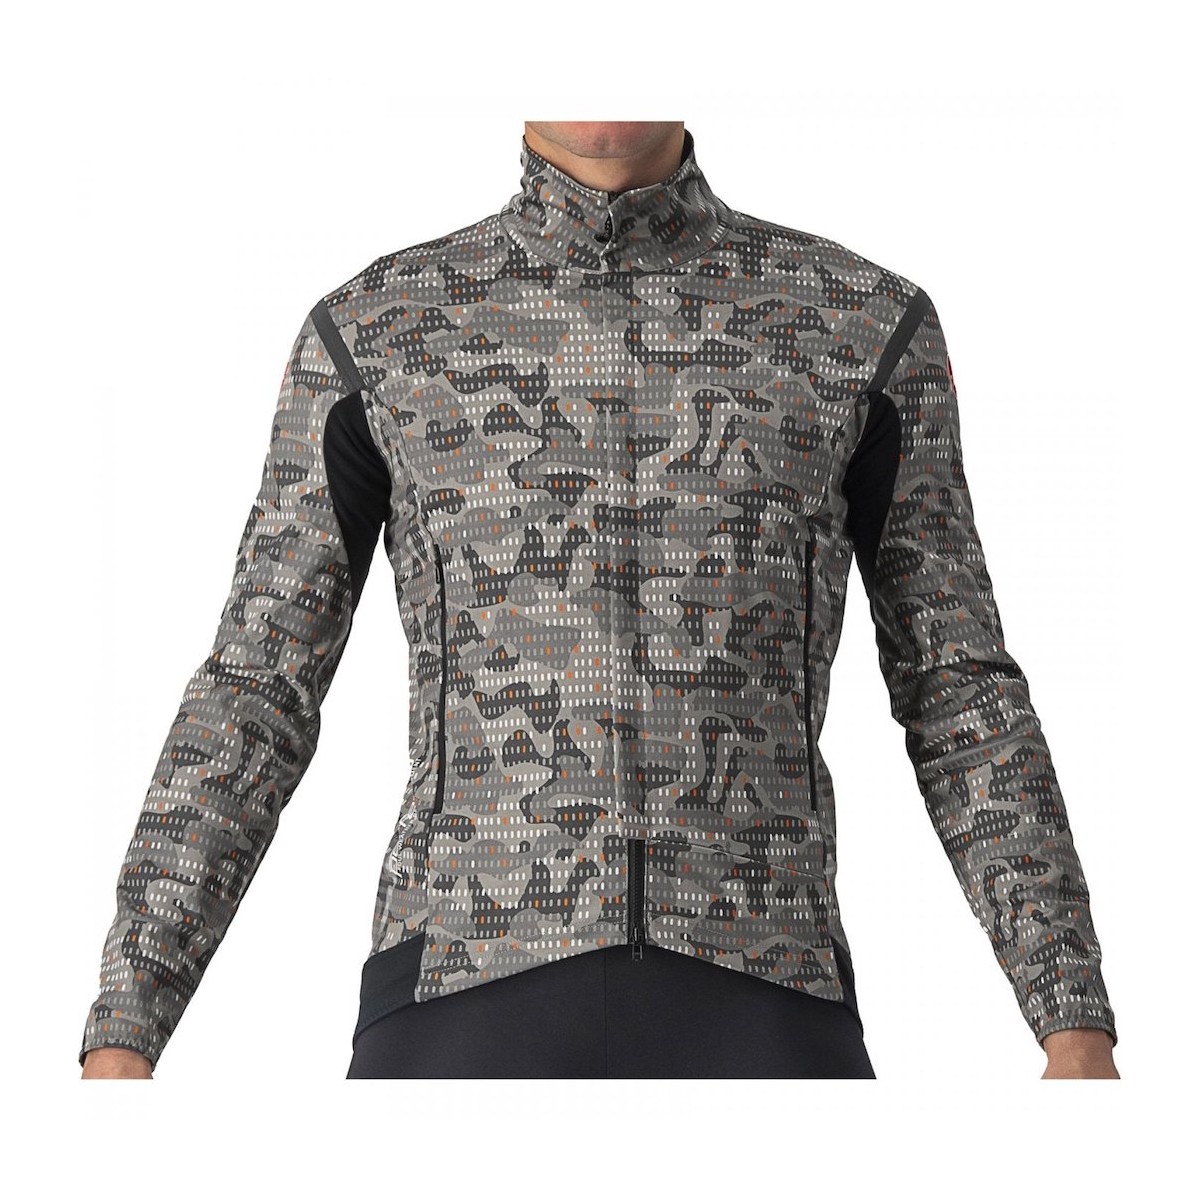 CASTELLI UNLIMITED PERFETTO ROS cycling jacket